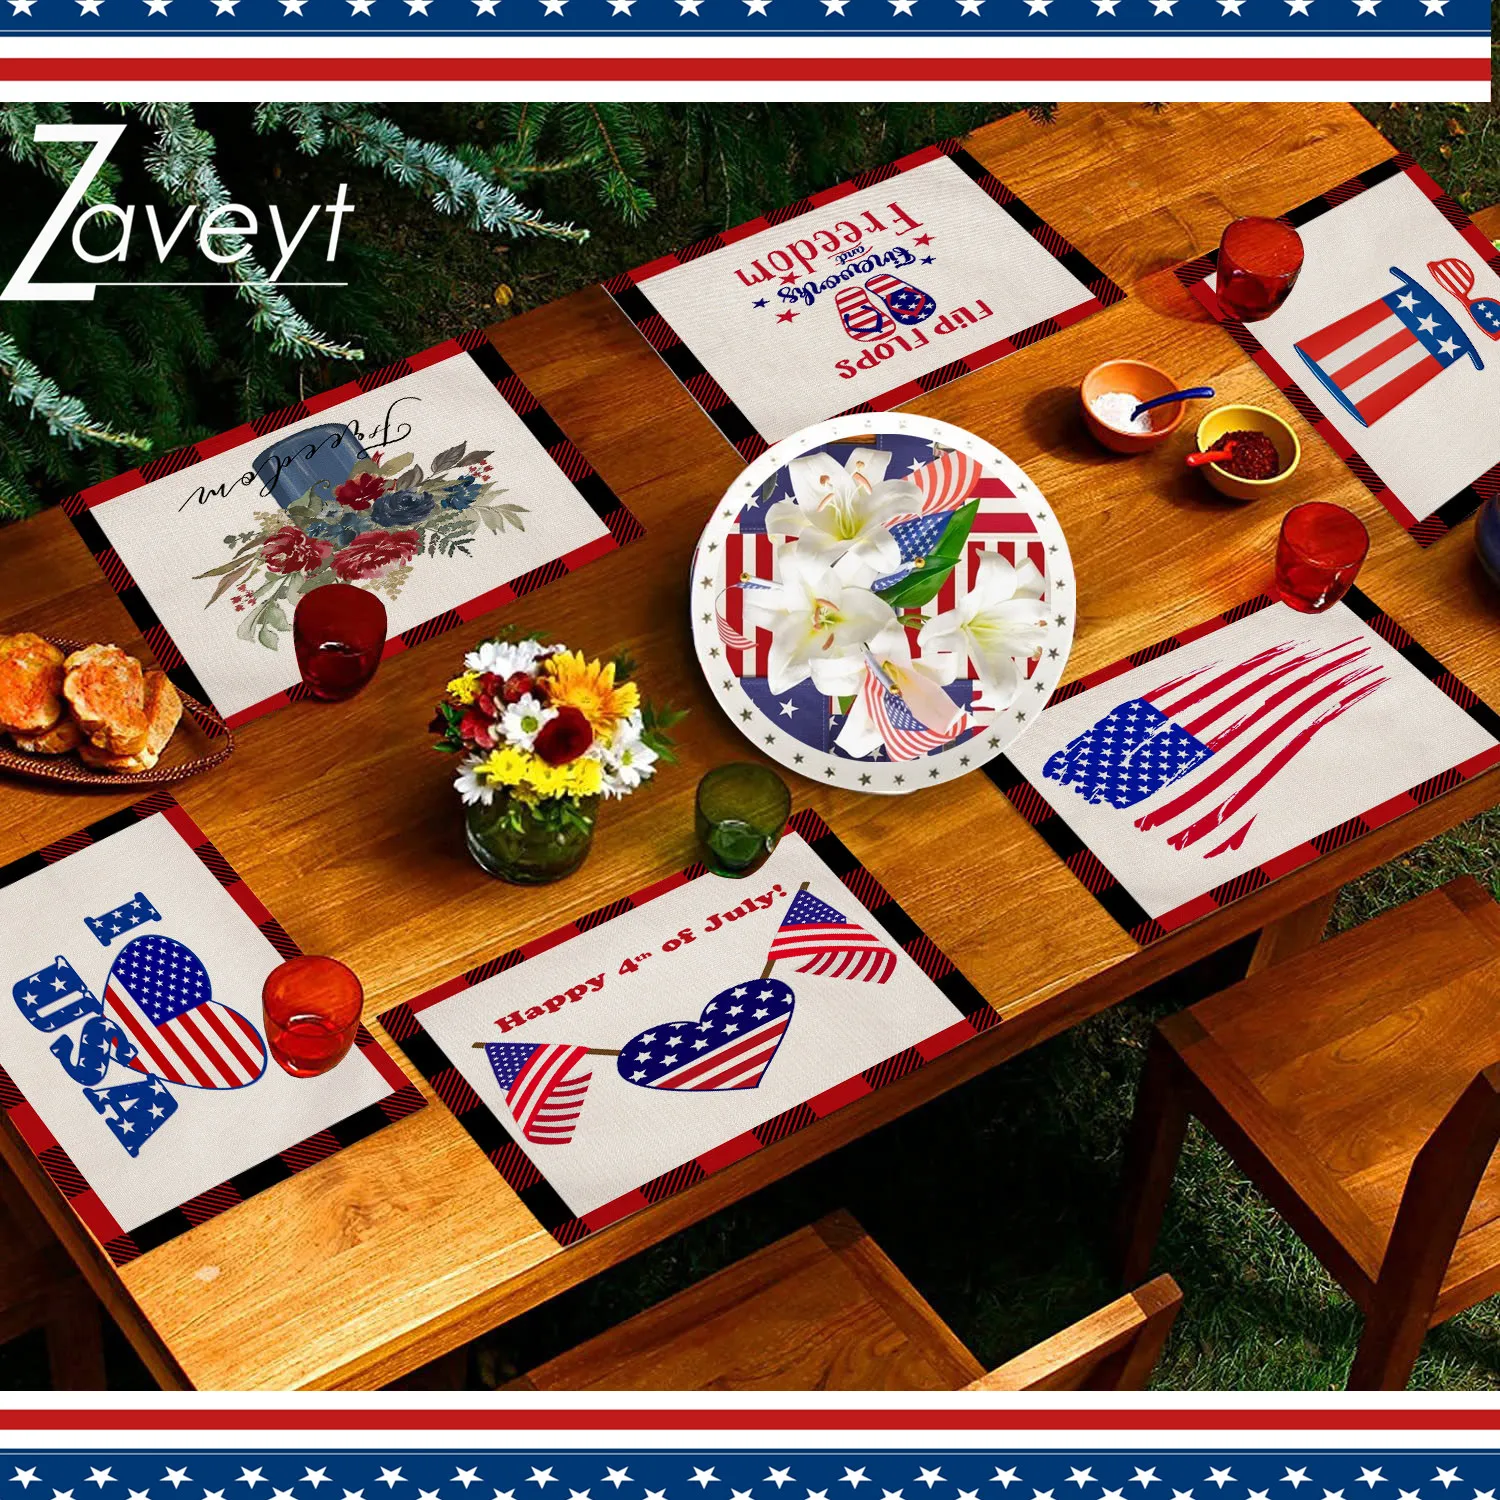 

4th of July Decorations Placemats Memorial Day American Flag Stars Stripes Place mats Patriotic America Freedom Independence Day